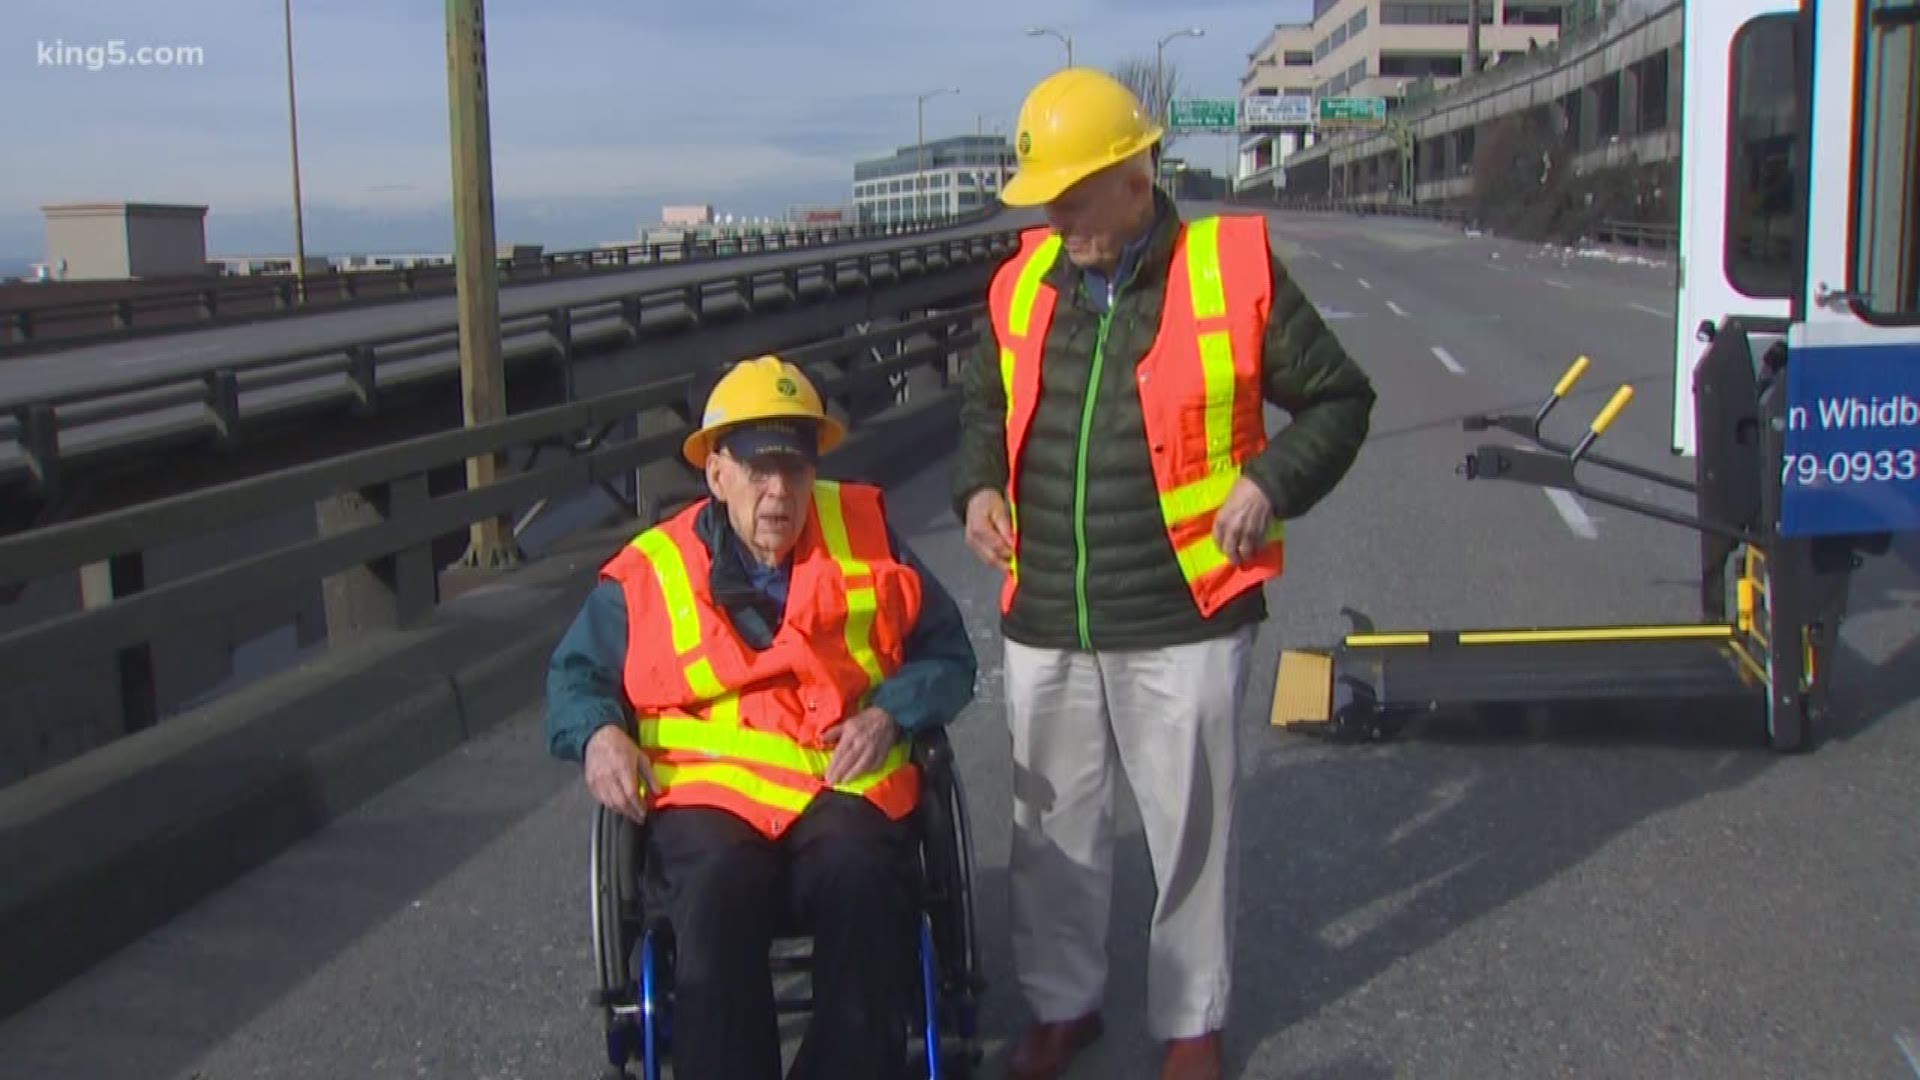 Engineers Jack Arnberg and former Washington governor Dan Evans designed the double decker highway 70 years ago.  After all these years, they share their fondest memories designing a Seattle icon together.